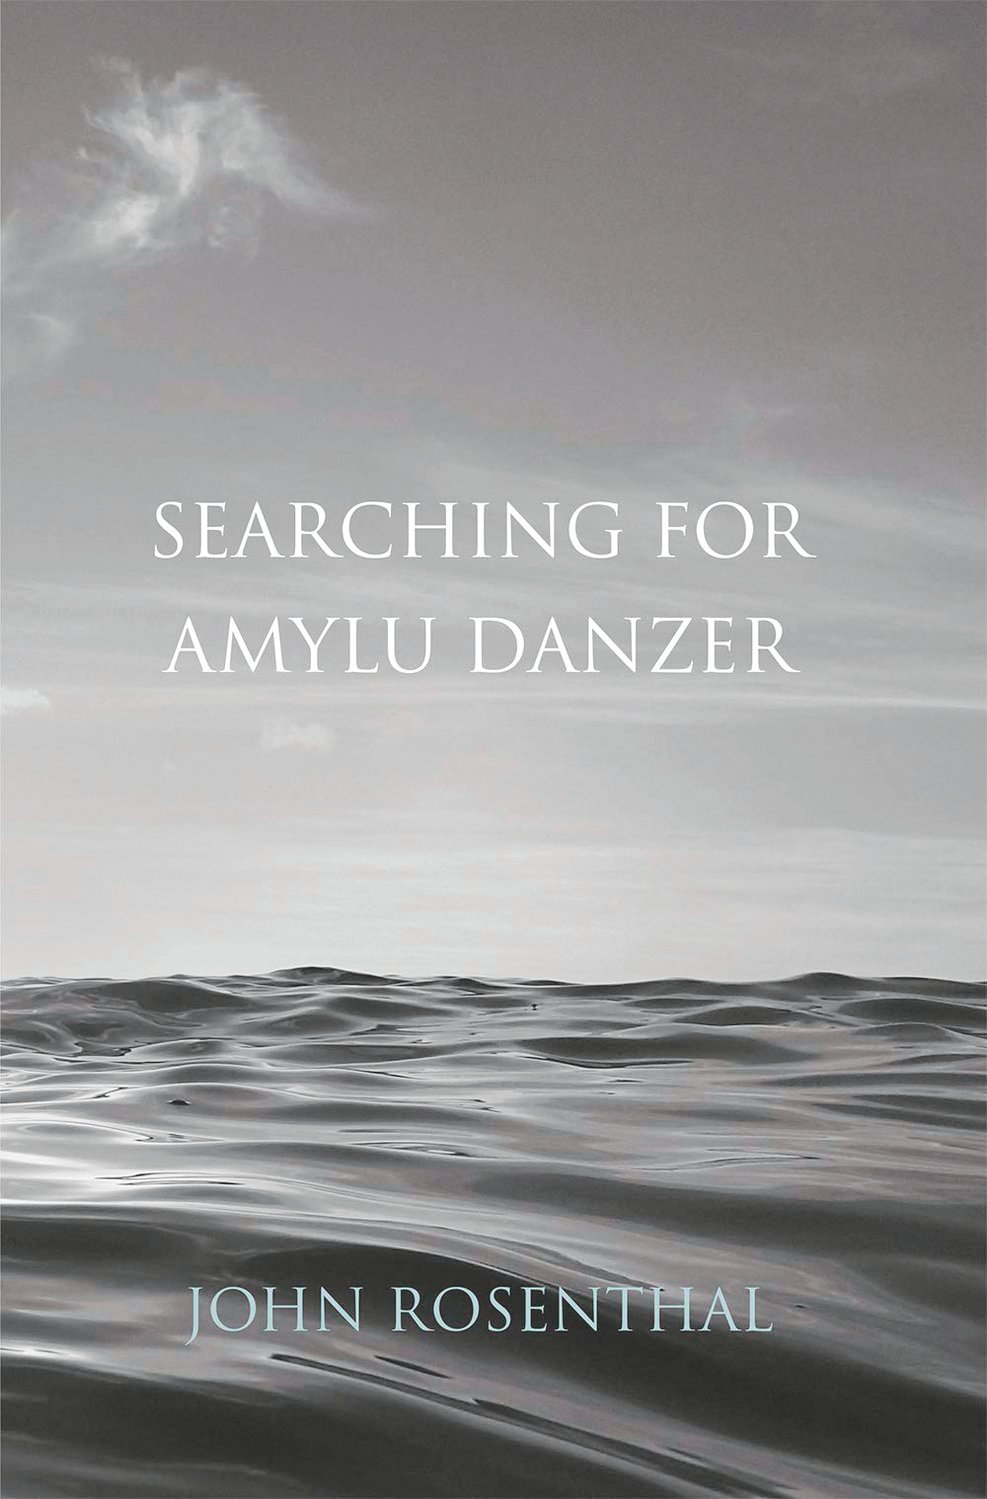 Rosenthal's latest book, 'Searching for Amylu Danzer,' is partly a memoir of his childhood friend and first girlfriend and the mystery of her death in 1965.